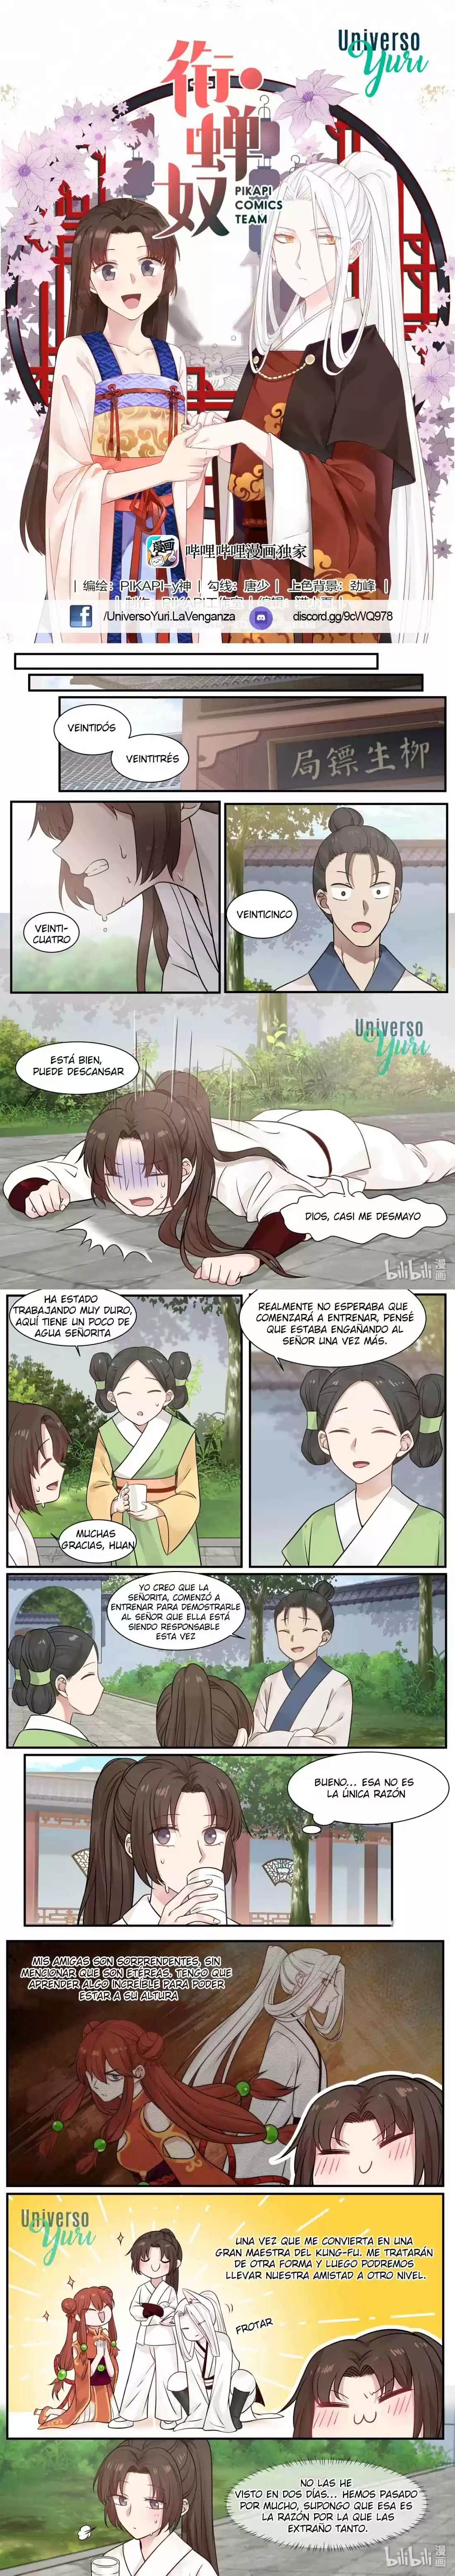 Xian Chan Nu 衔蝉奴: Chapter 30 - Page 1